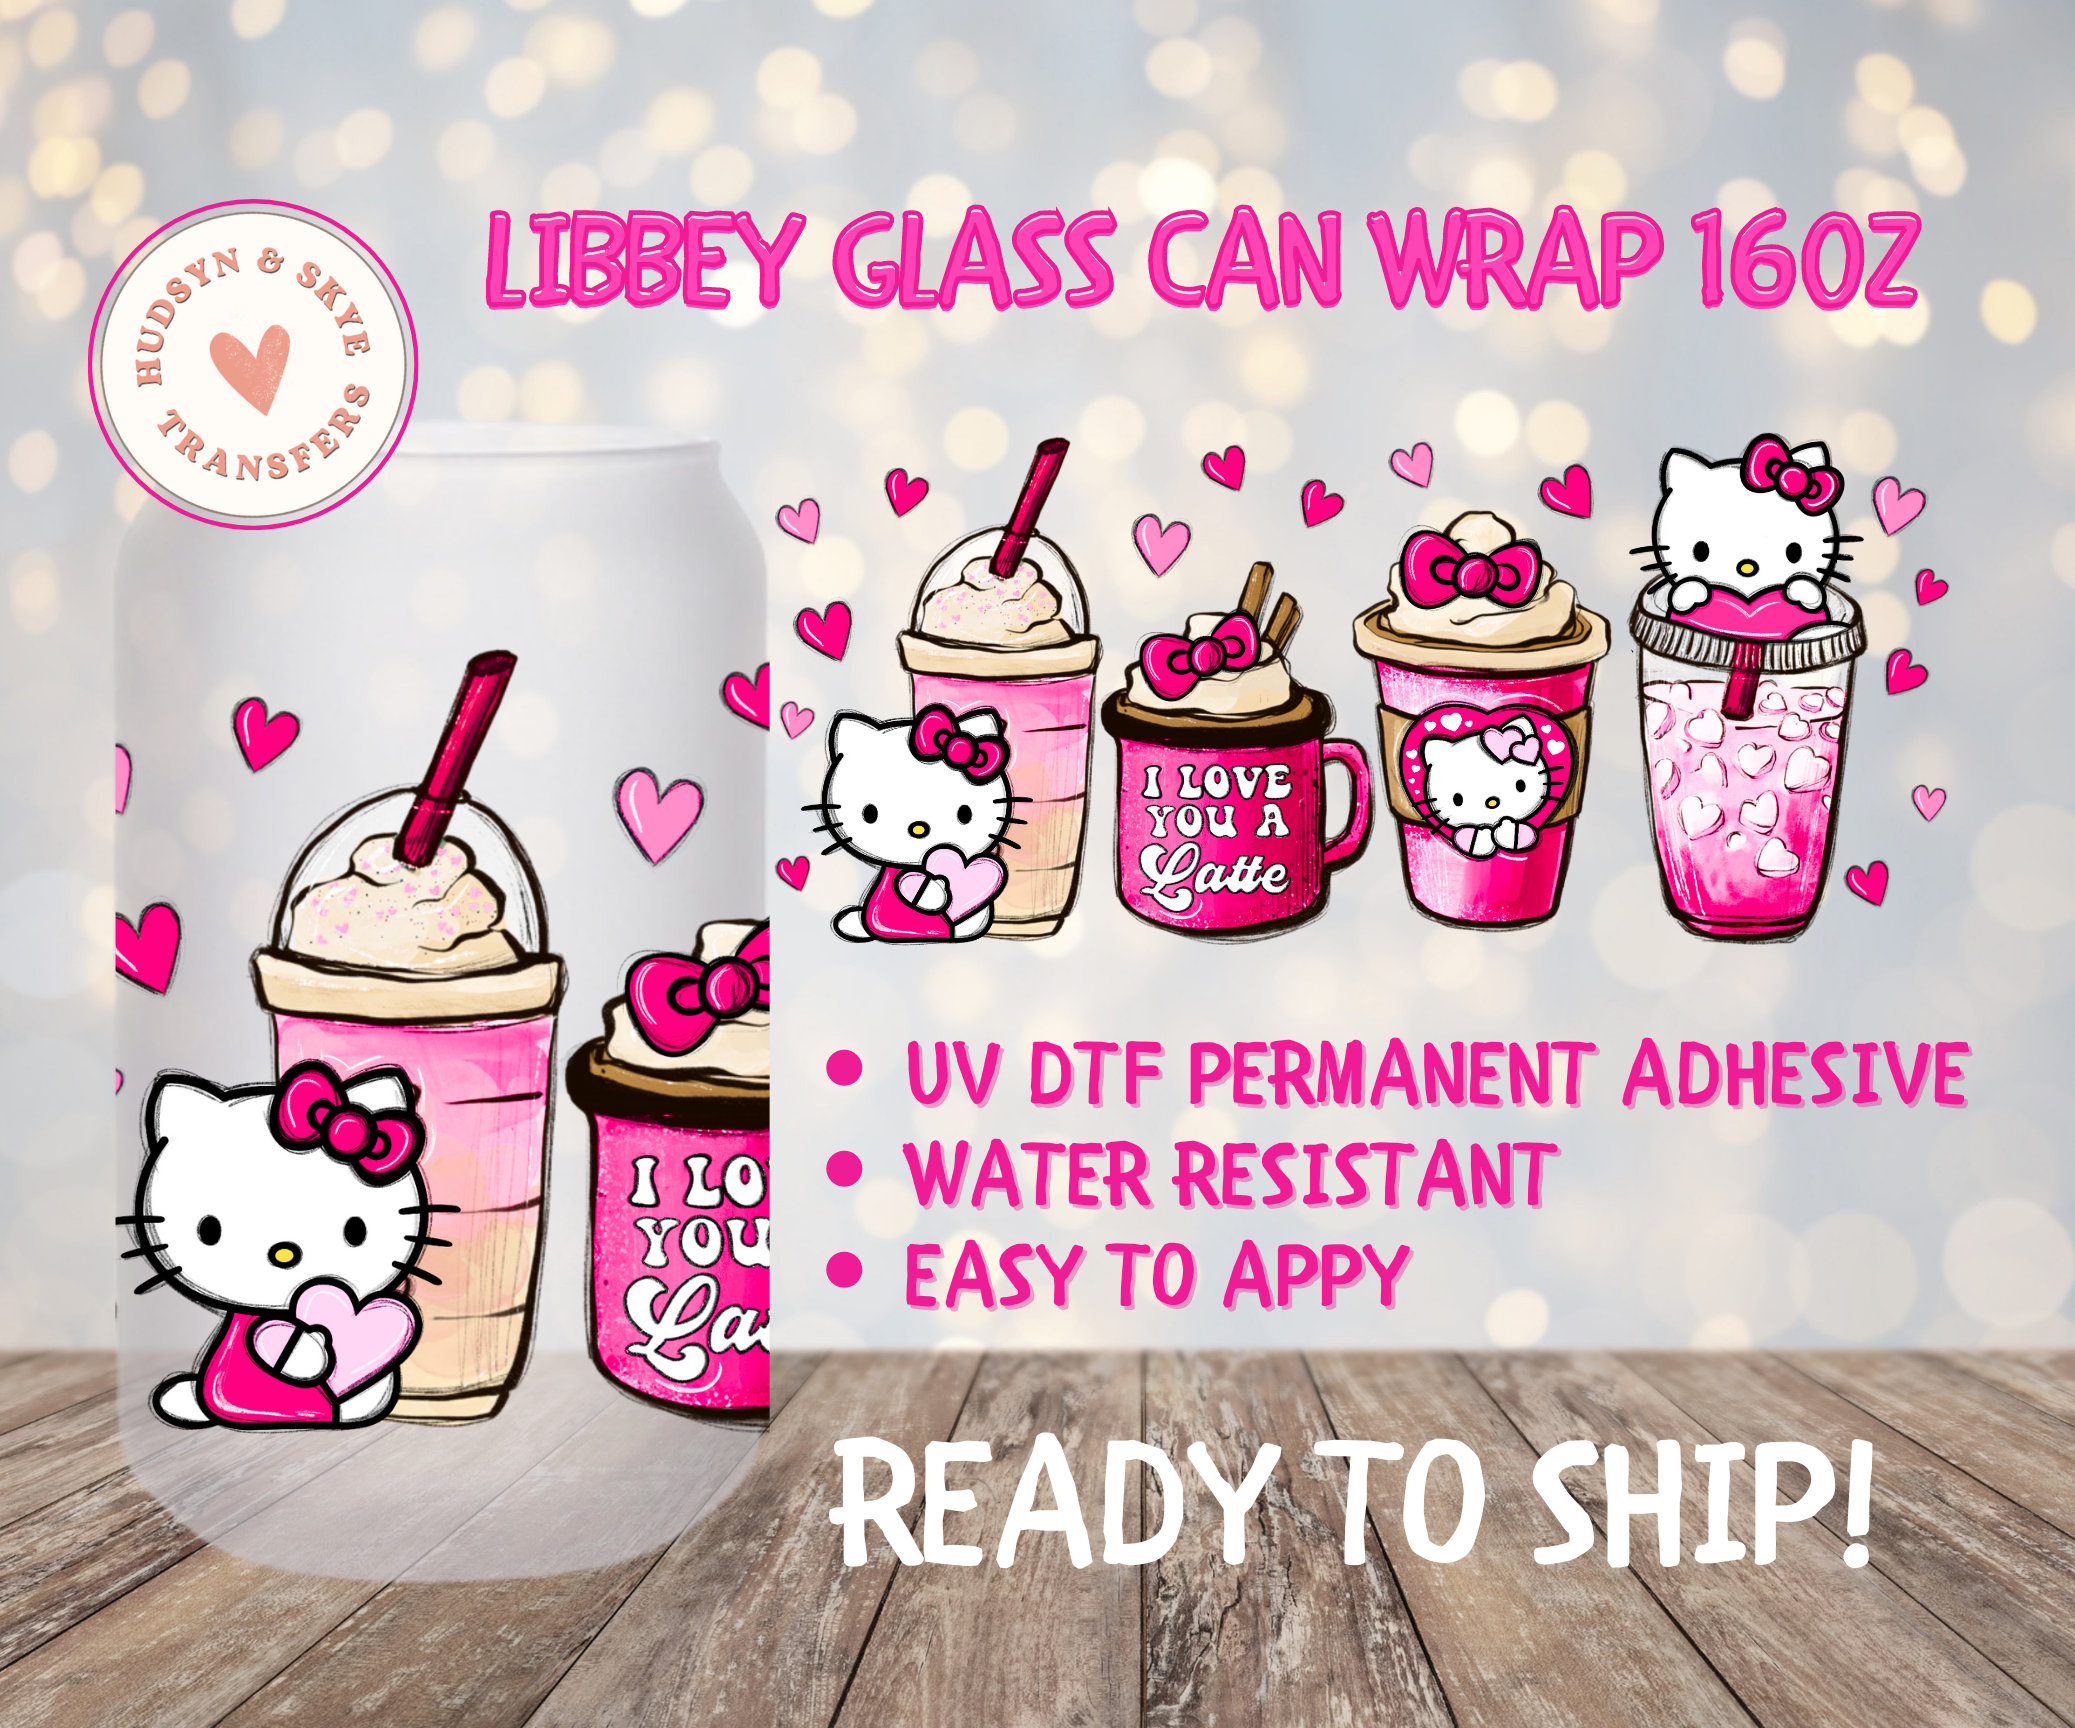 UV DTF Cup Wrap Transfer Sticker for Glass Coffee Cups,5 Sheets of Mixed Style UV DTF Transfer Sticker for 16oz Libbey Glass Cups,DIY Waterproof Clear